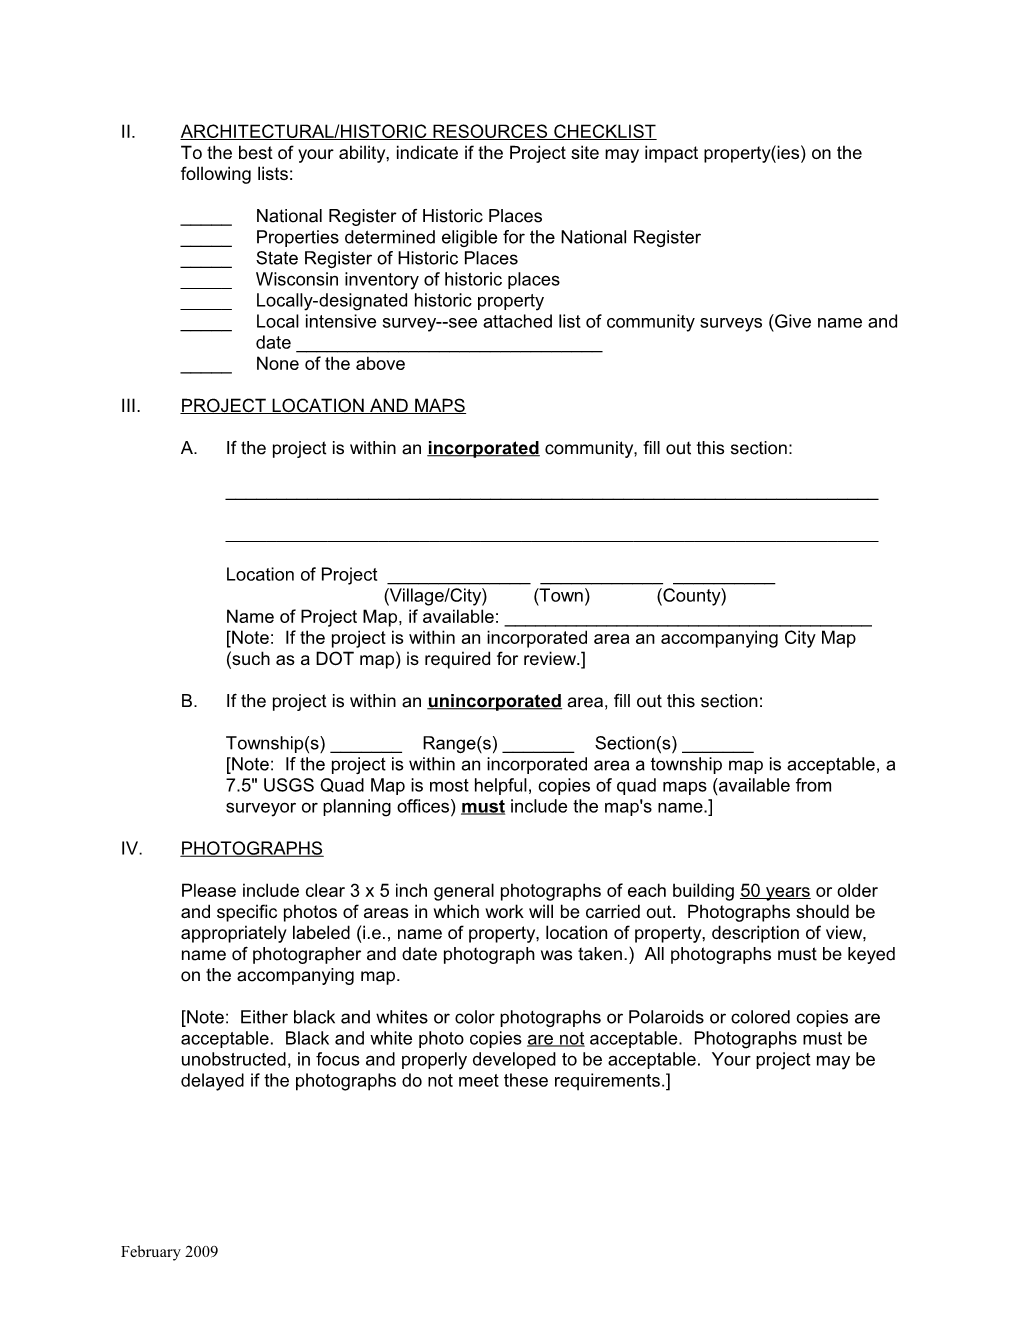 Initial Project Review Form